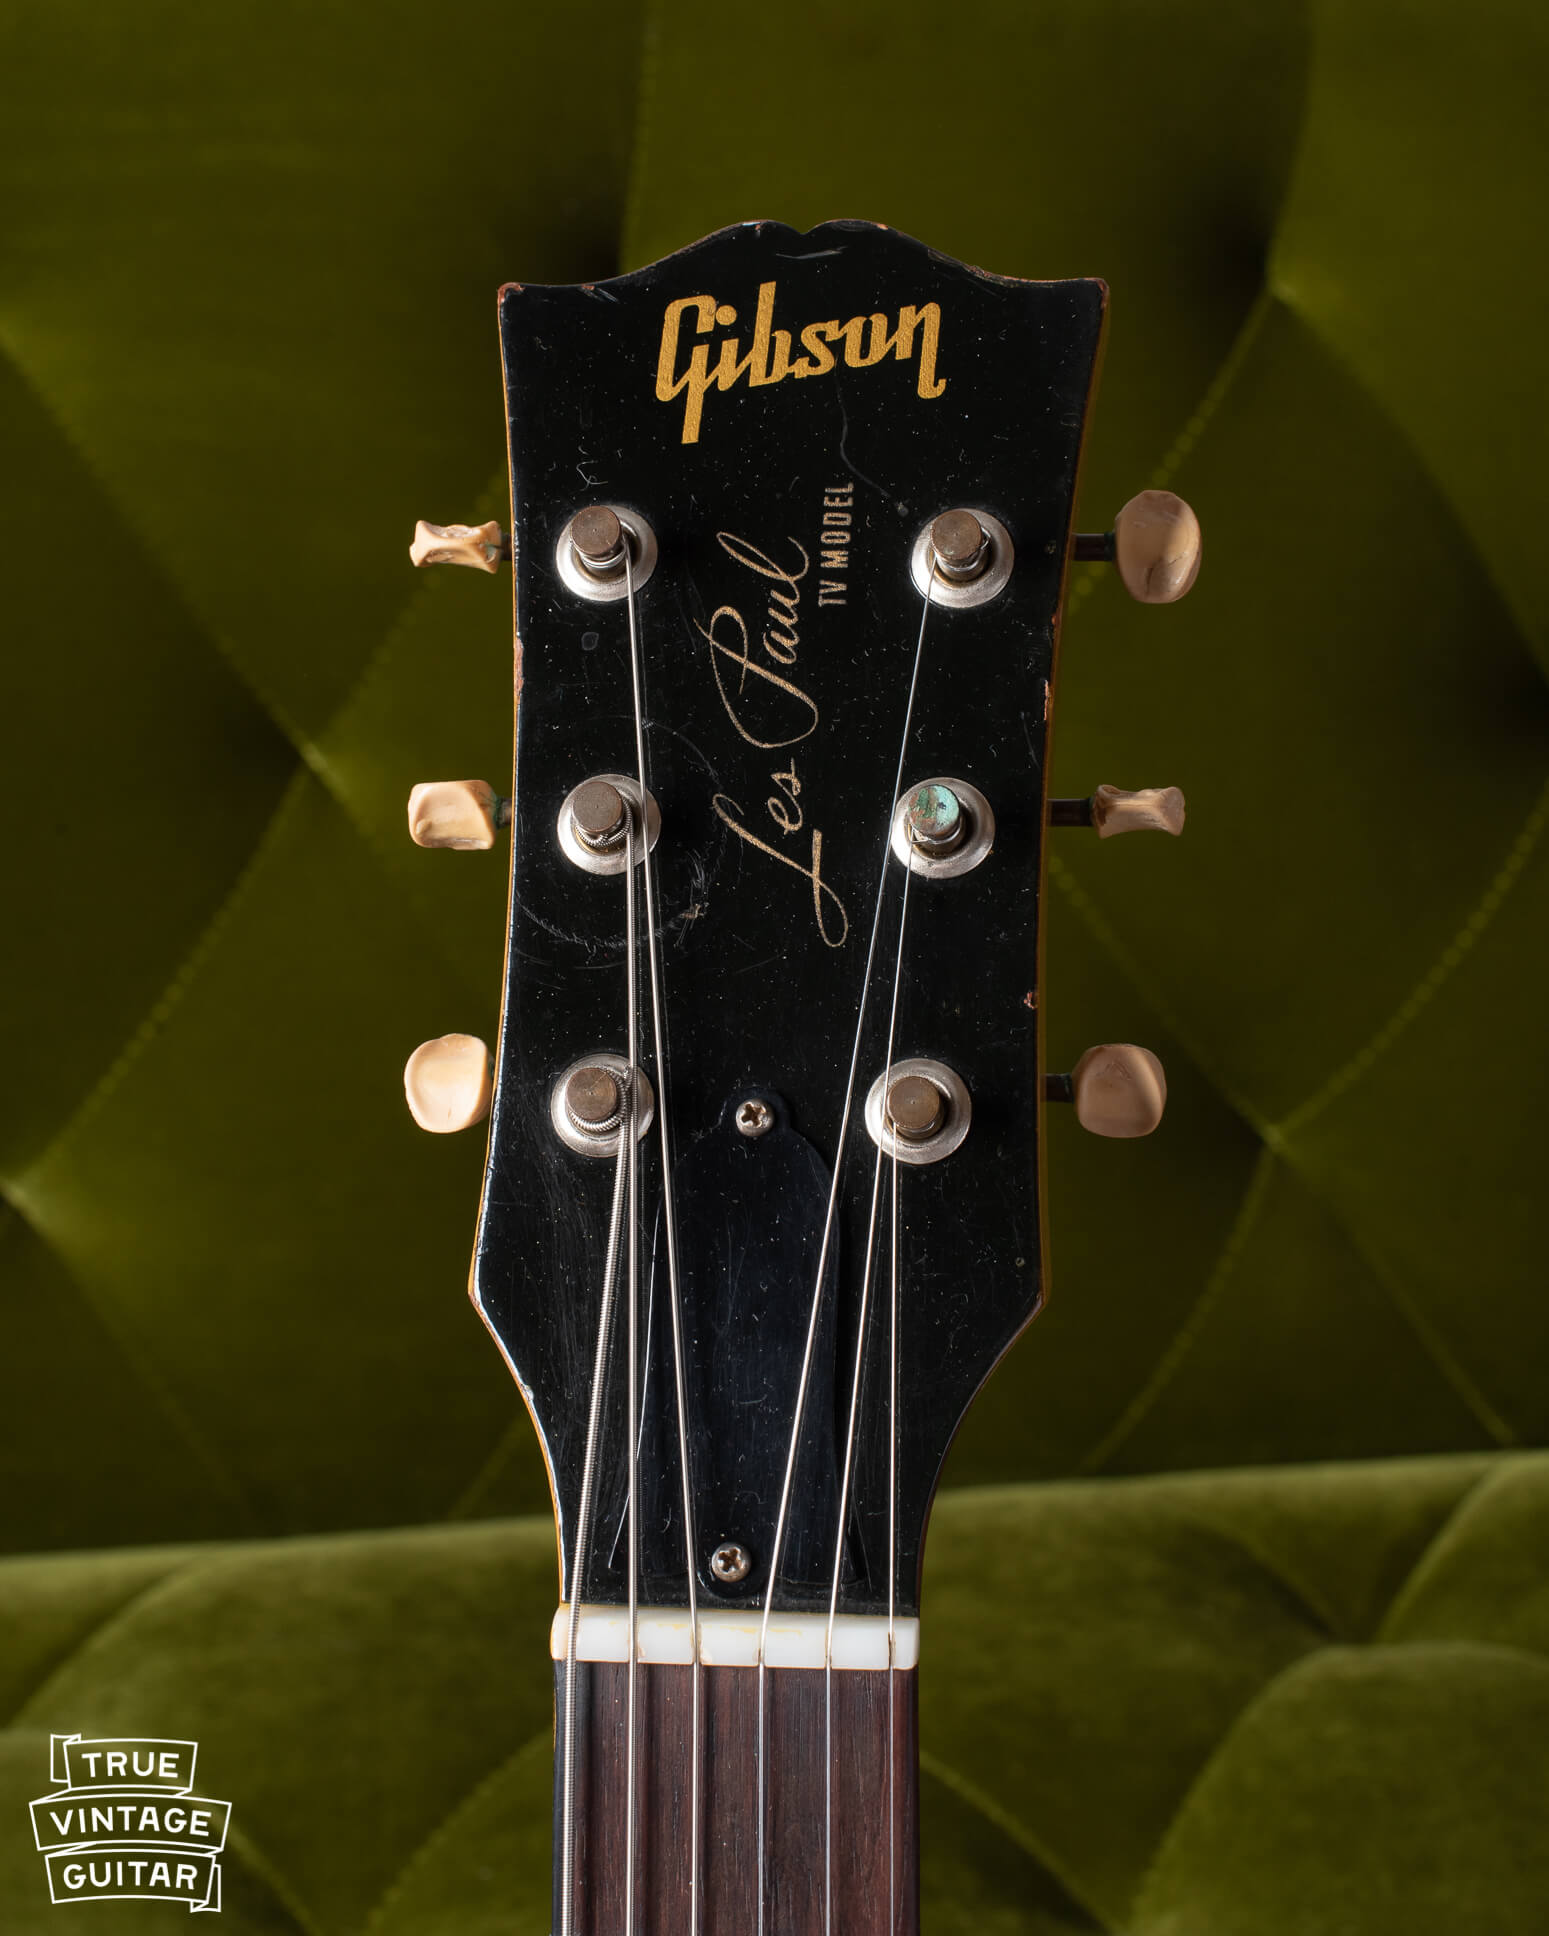 Gibson Les Paul TV Model headstock from 1956 with shrunken tuner buttons. 